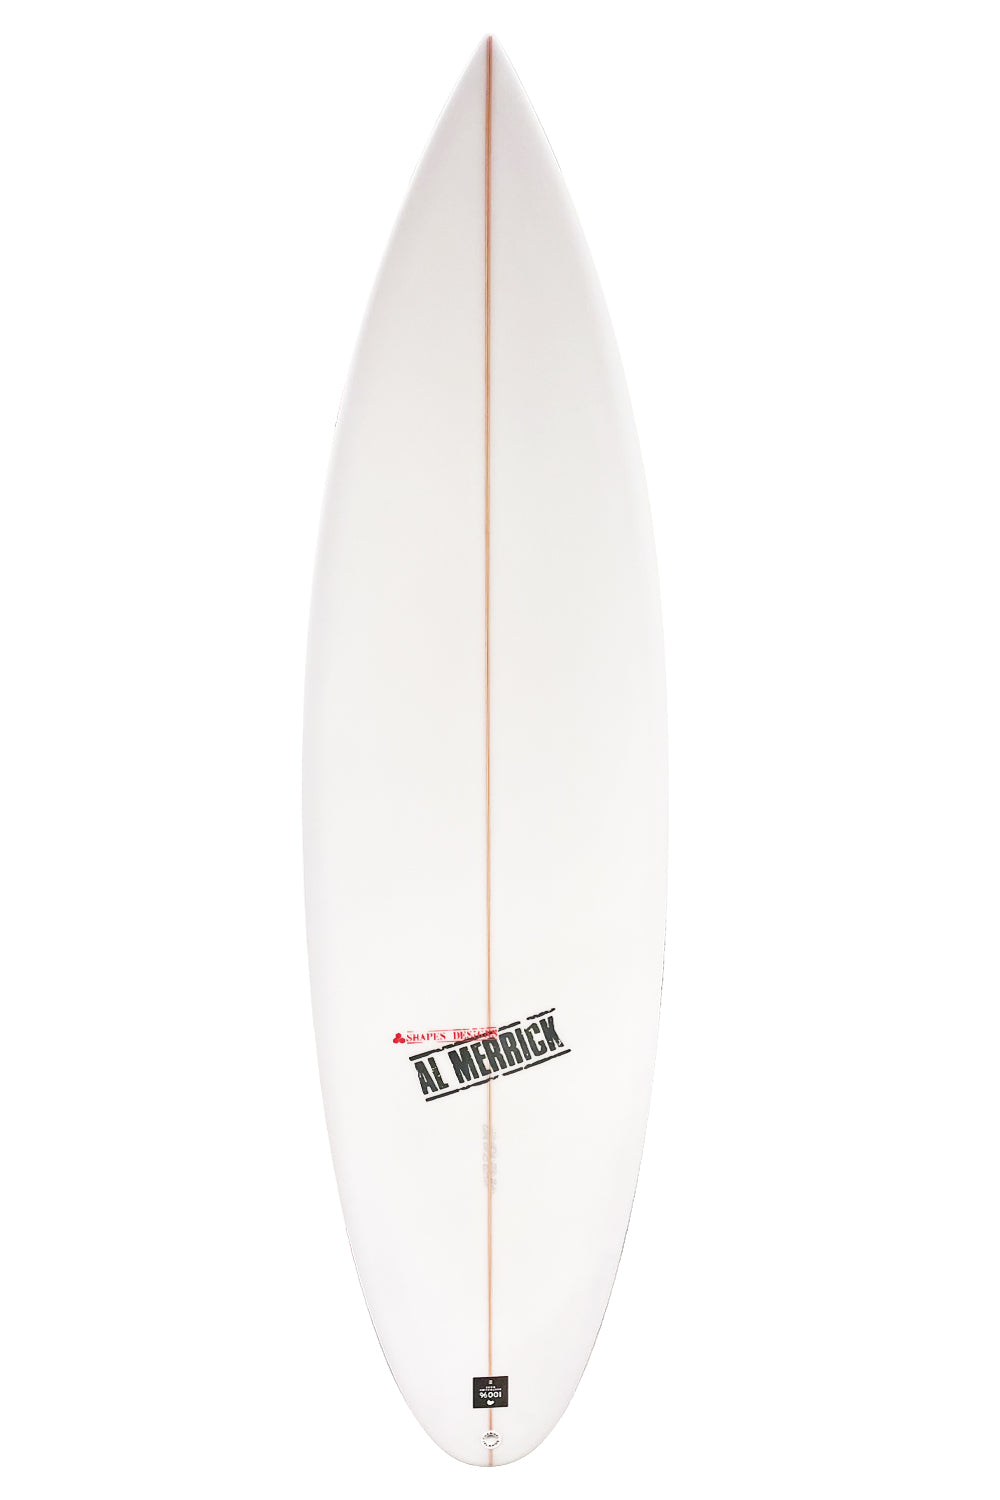 Channel Islands CI Pro Surfboard - Round Tail